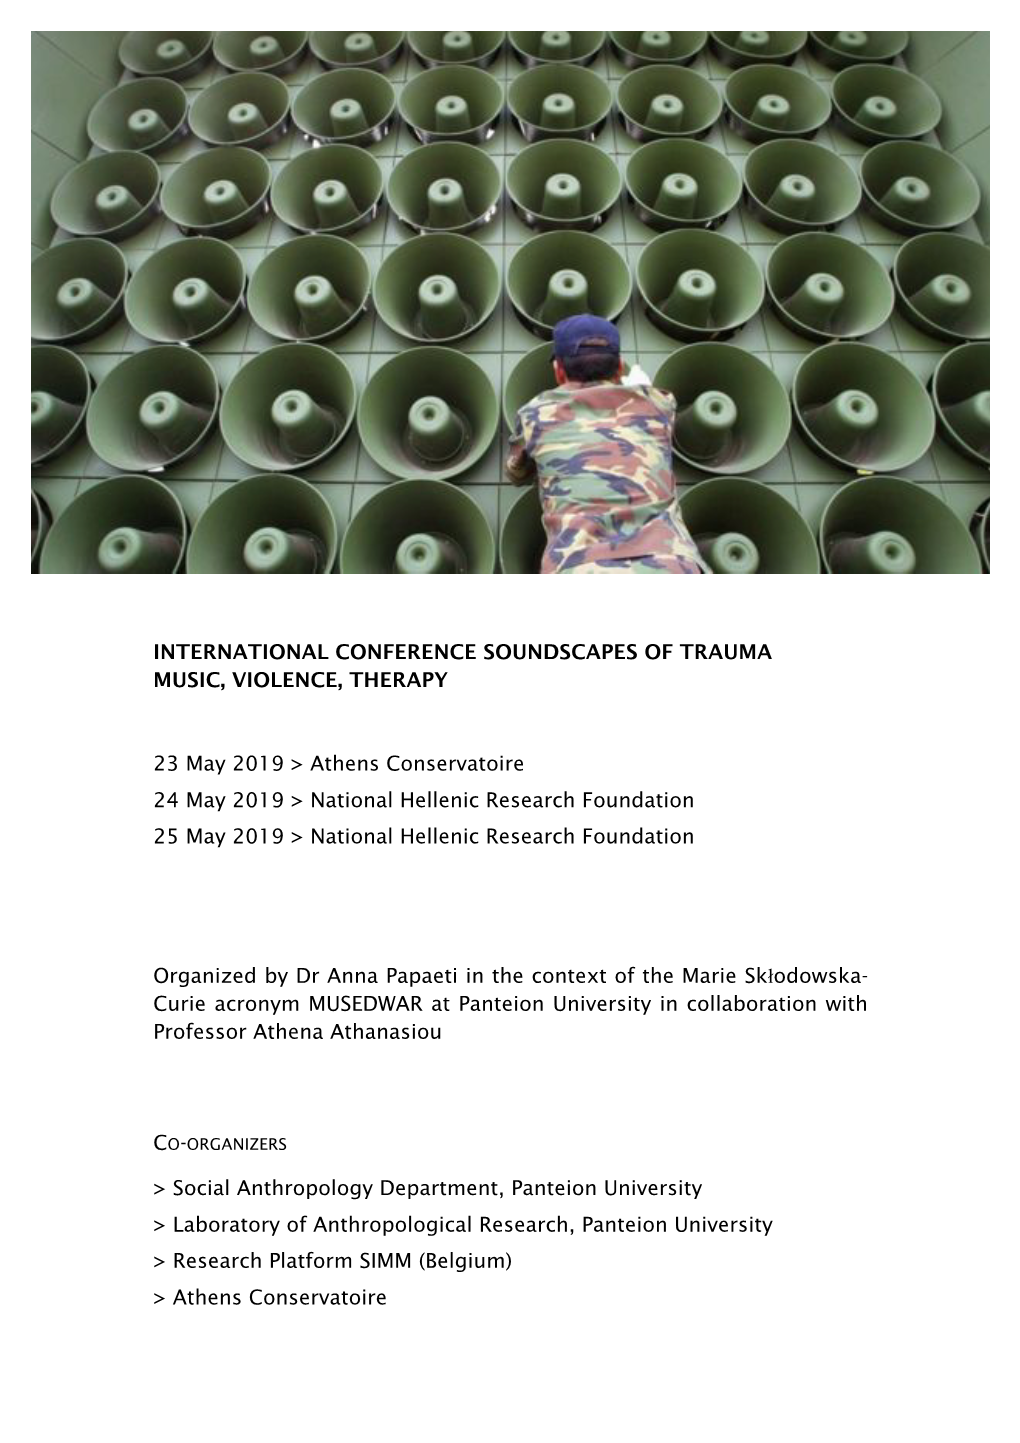 INTERNATIONAL CONFERENCE SOUNDSCAPES of TRAUMA MUSIC, VIOLENCE, THERAPY 23 May 2019 &gt; Athens Conservatoire 24 May 2019 &gt; N